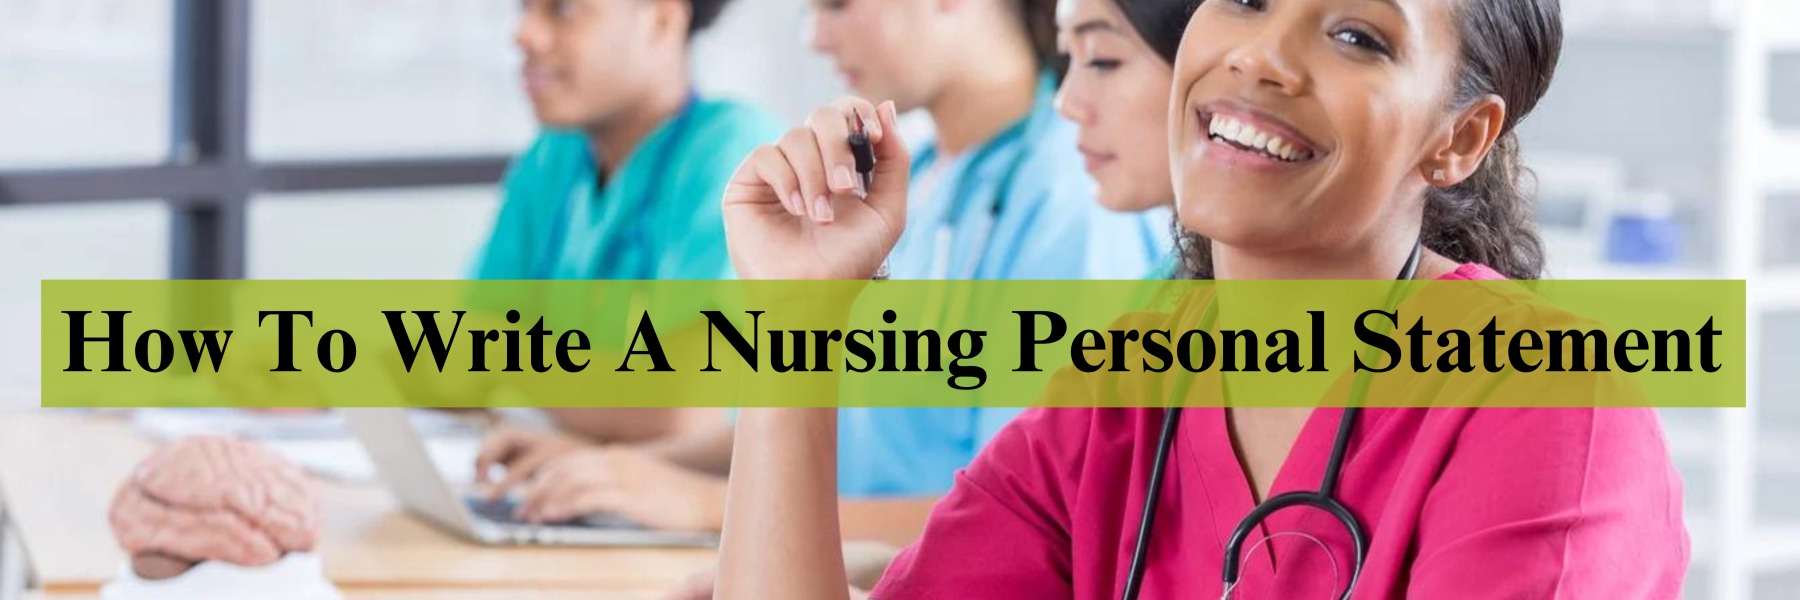 How to write a nursing personal statement